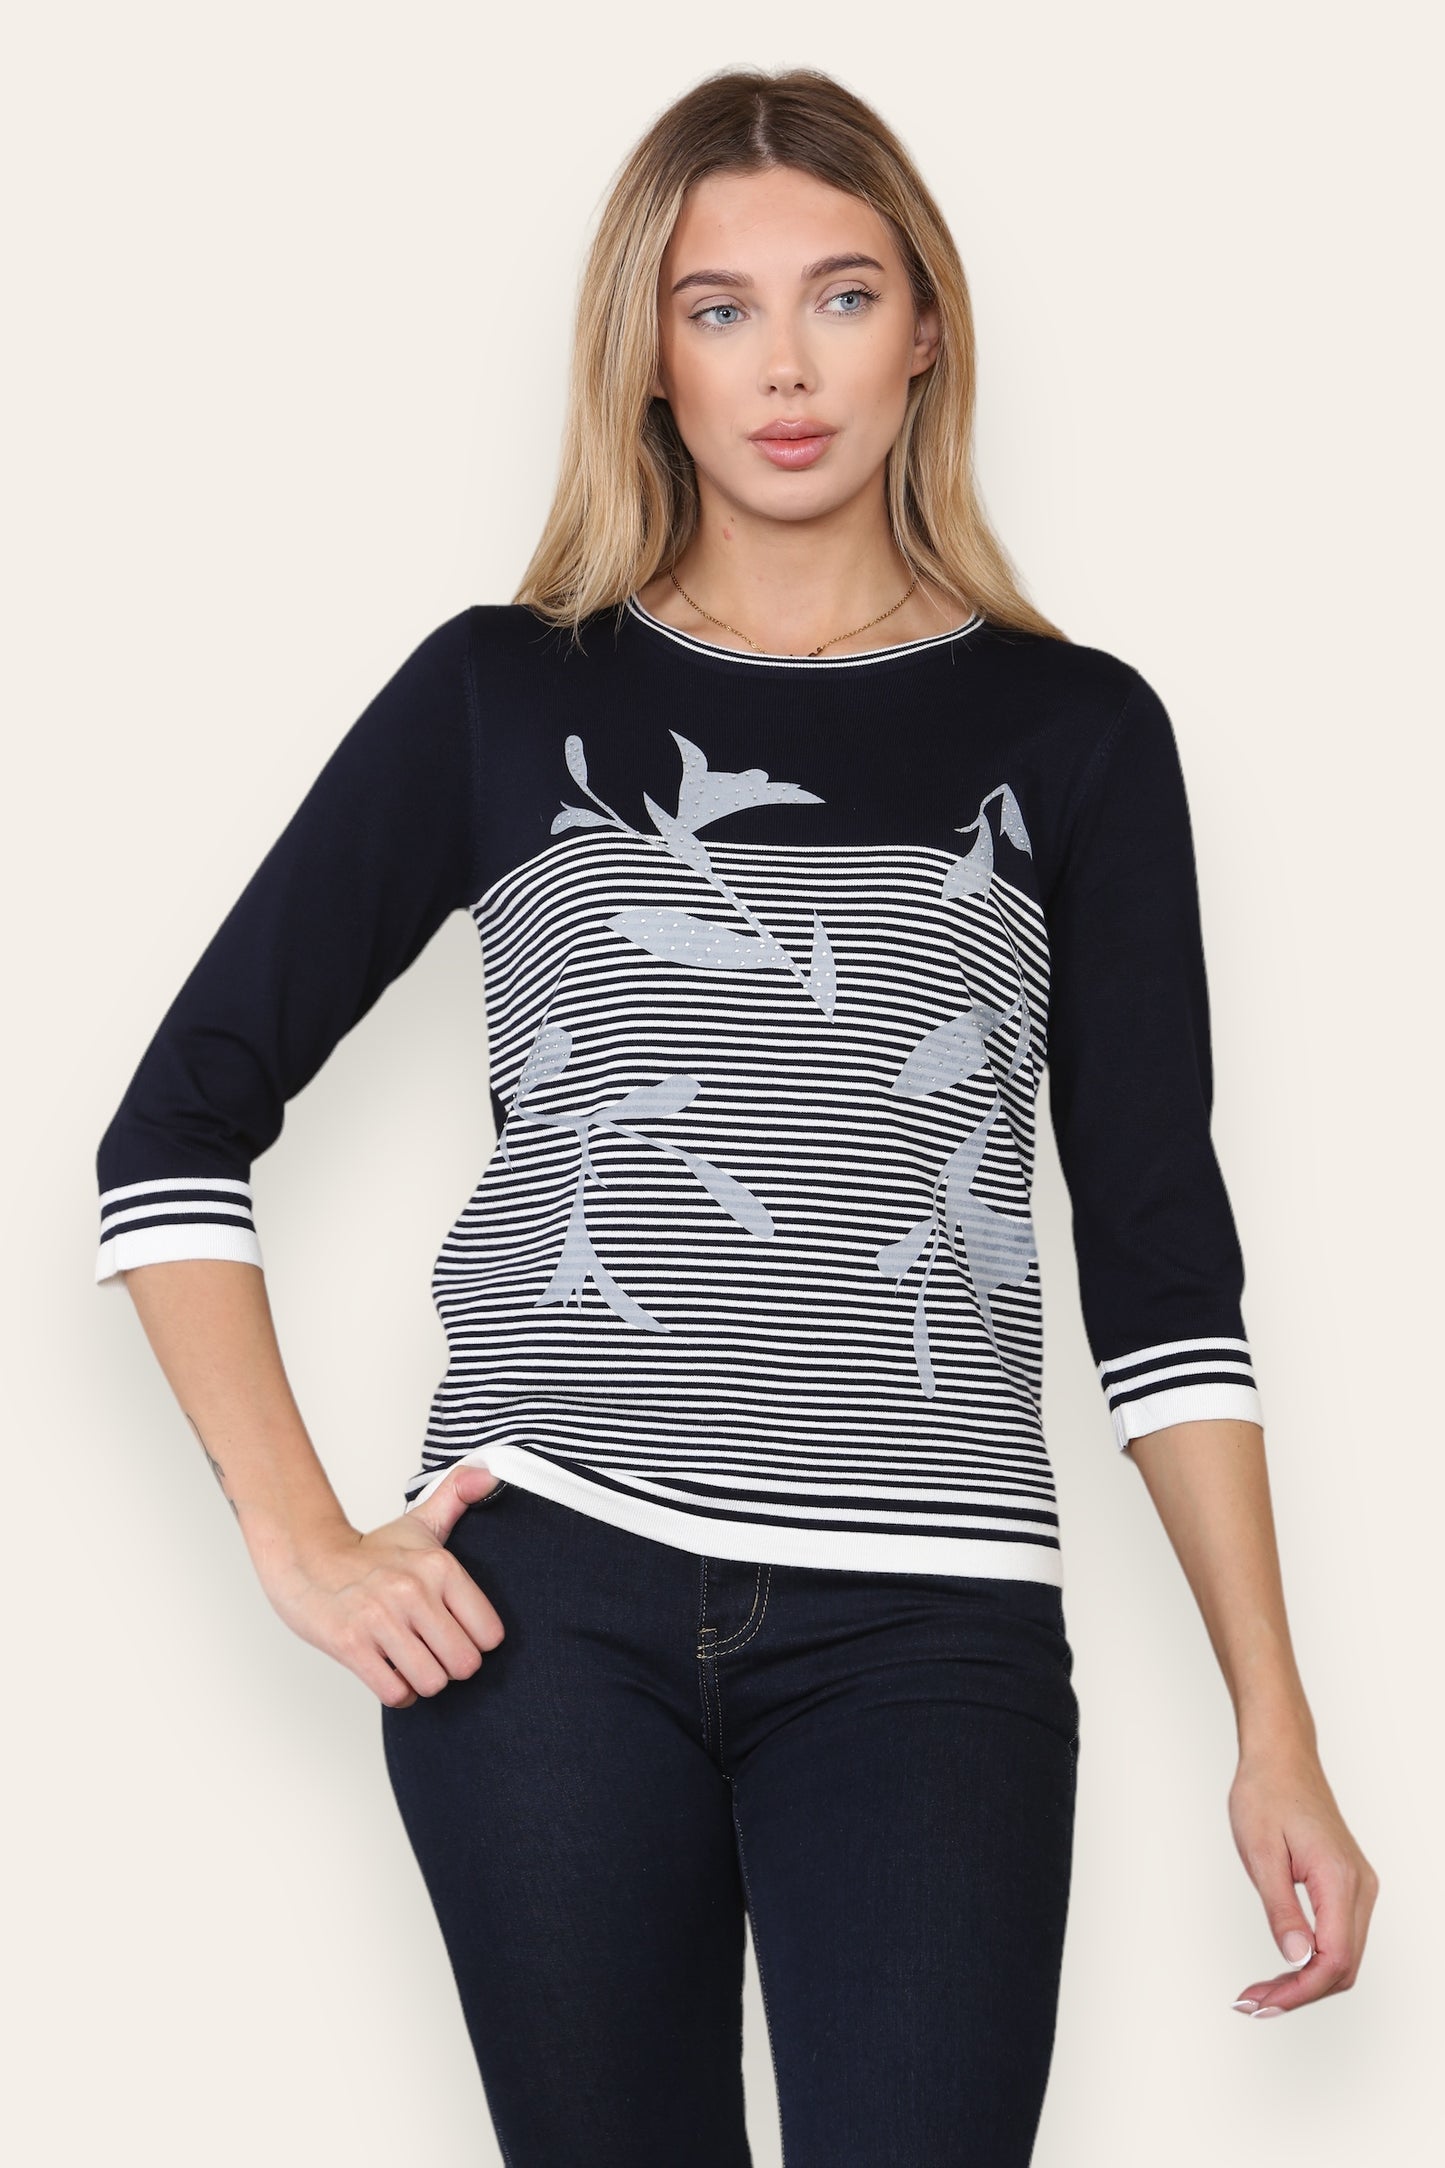 Striped Floral Print Crew Neck 3/4 Sleeve Top